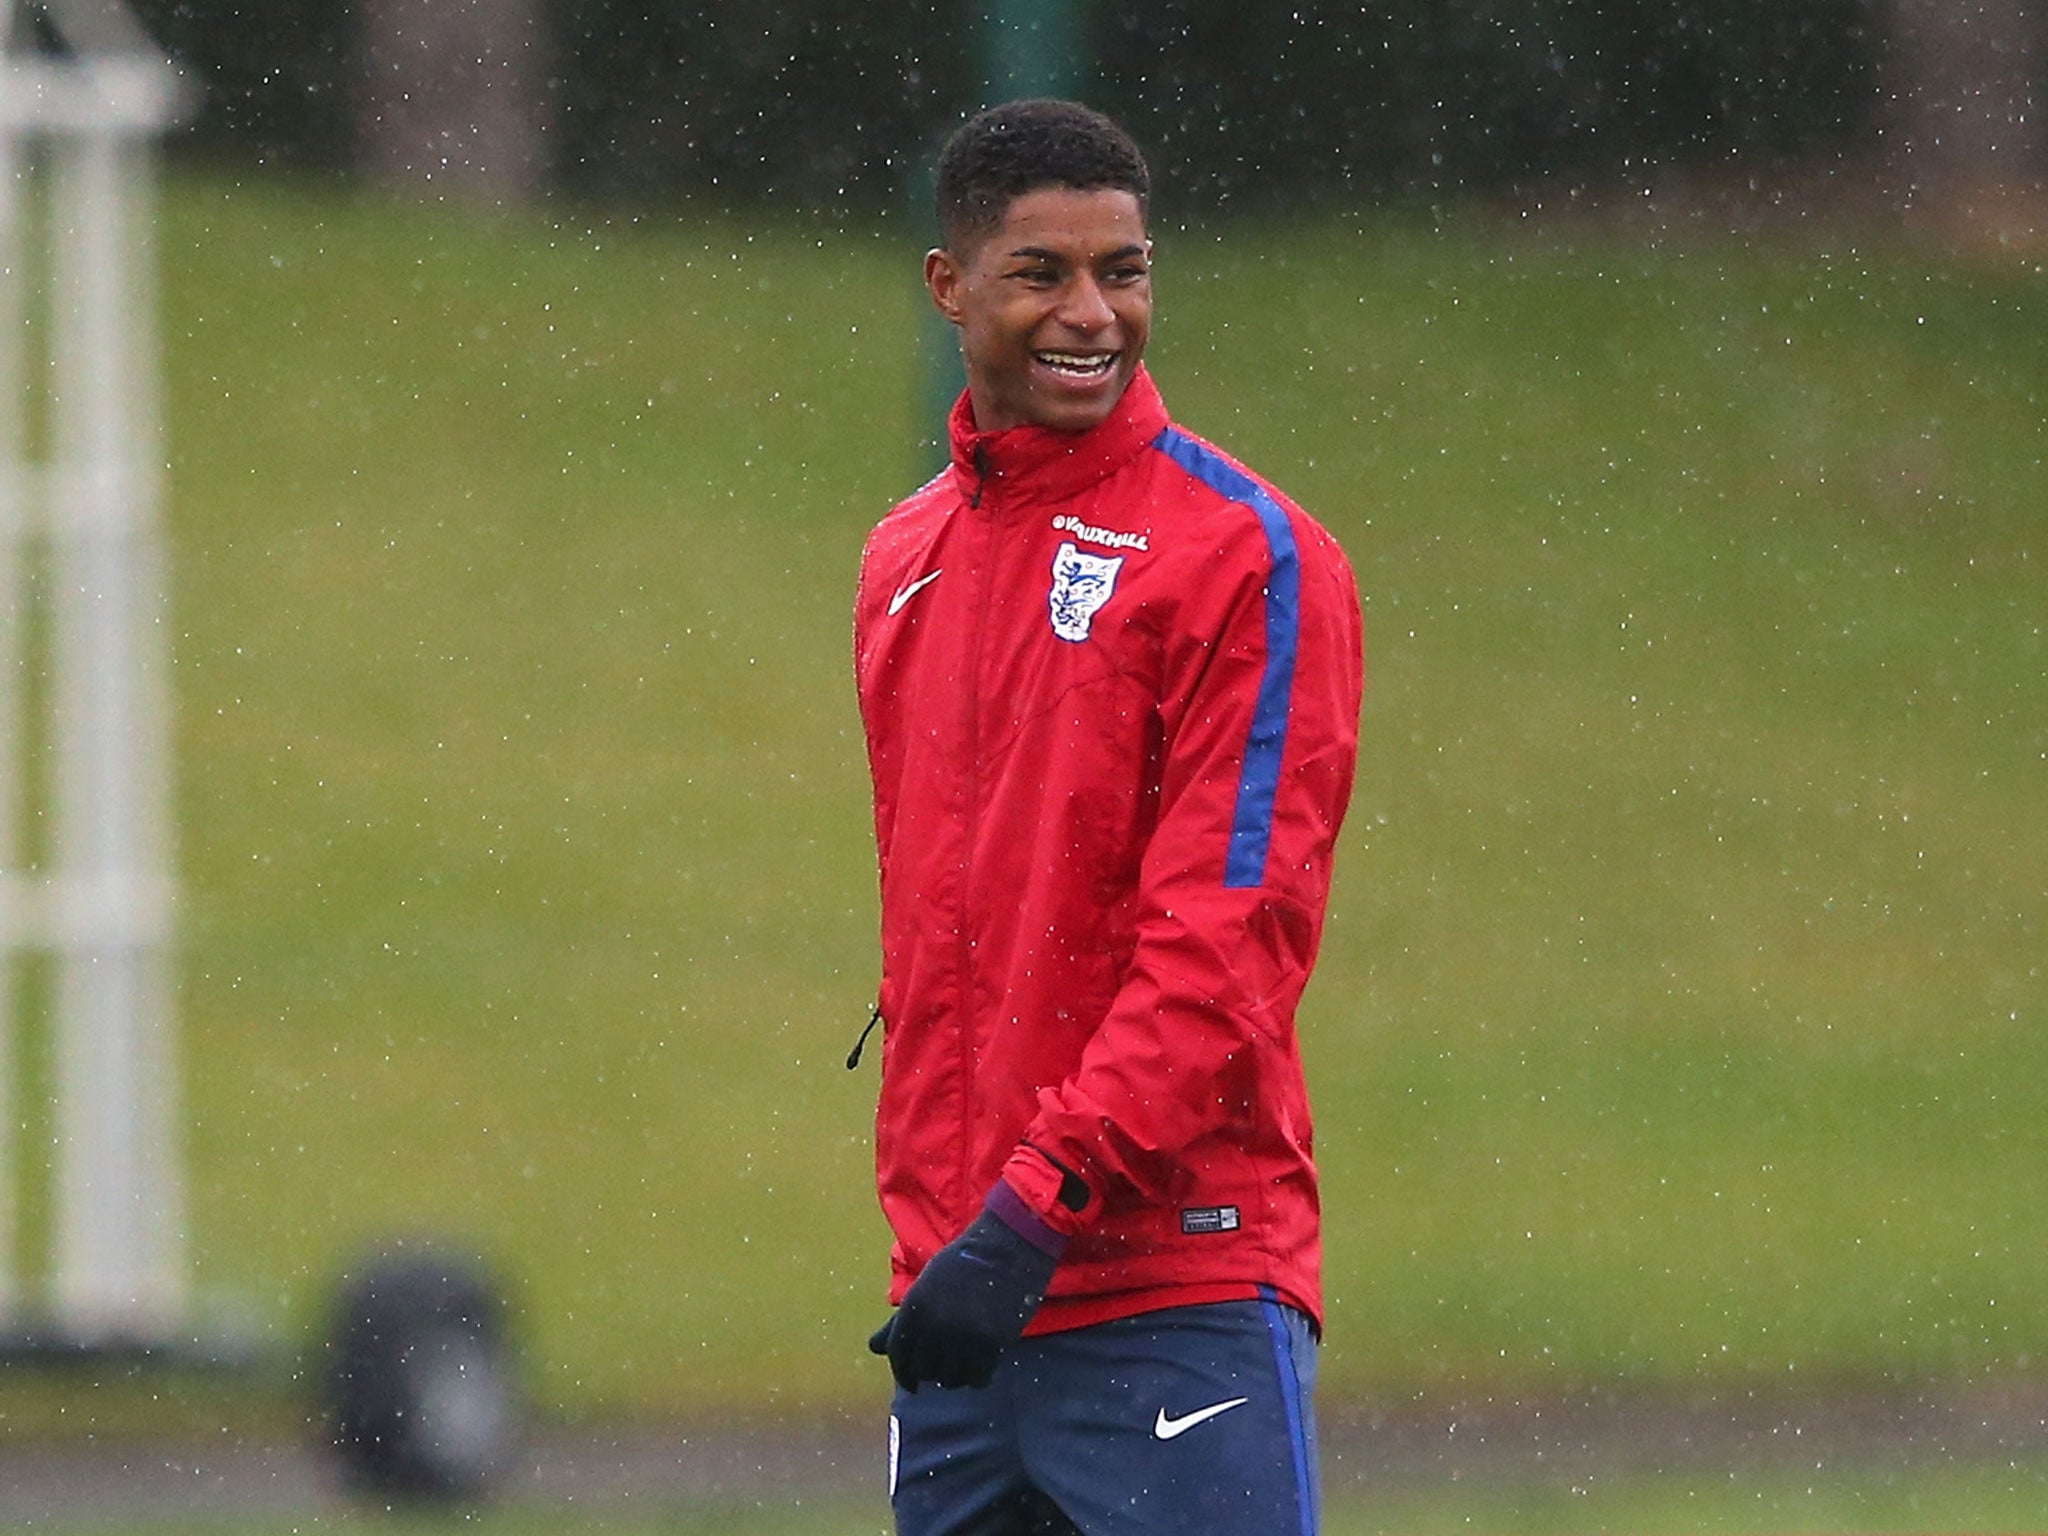 Marcus Rashford during an England training session ahead of the friendly with Australia